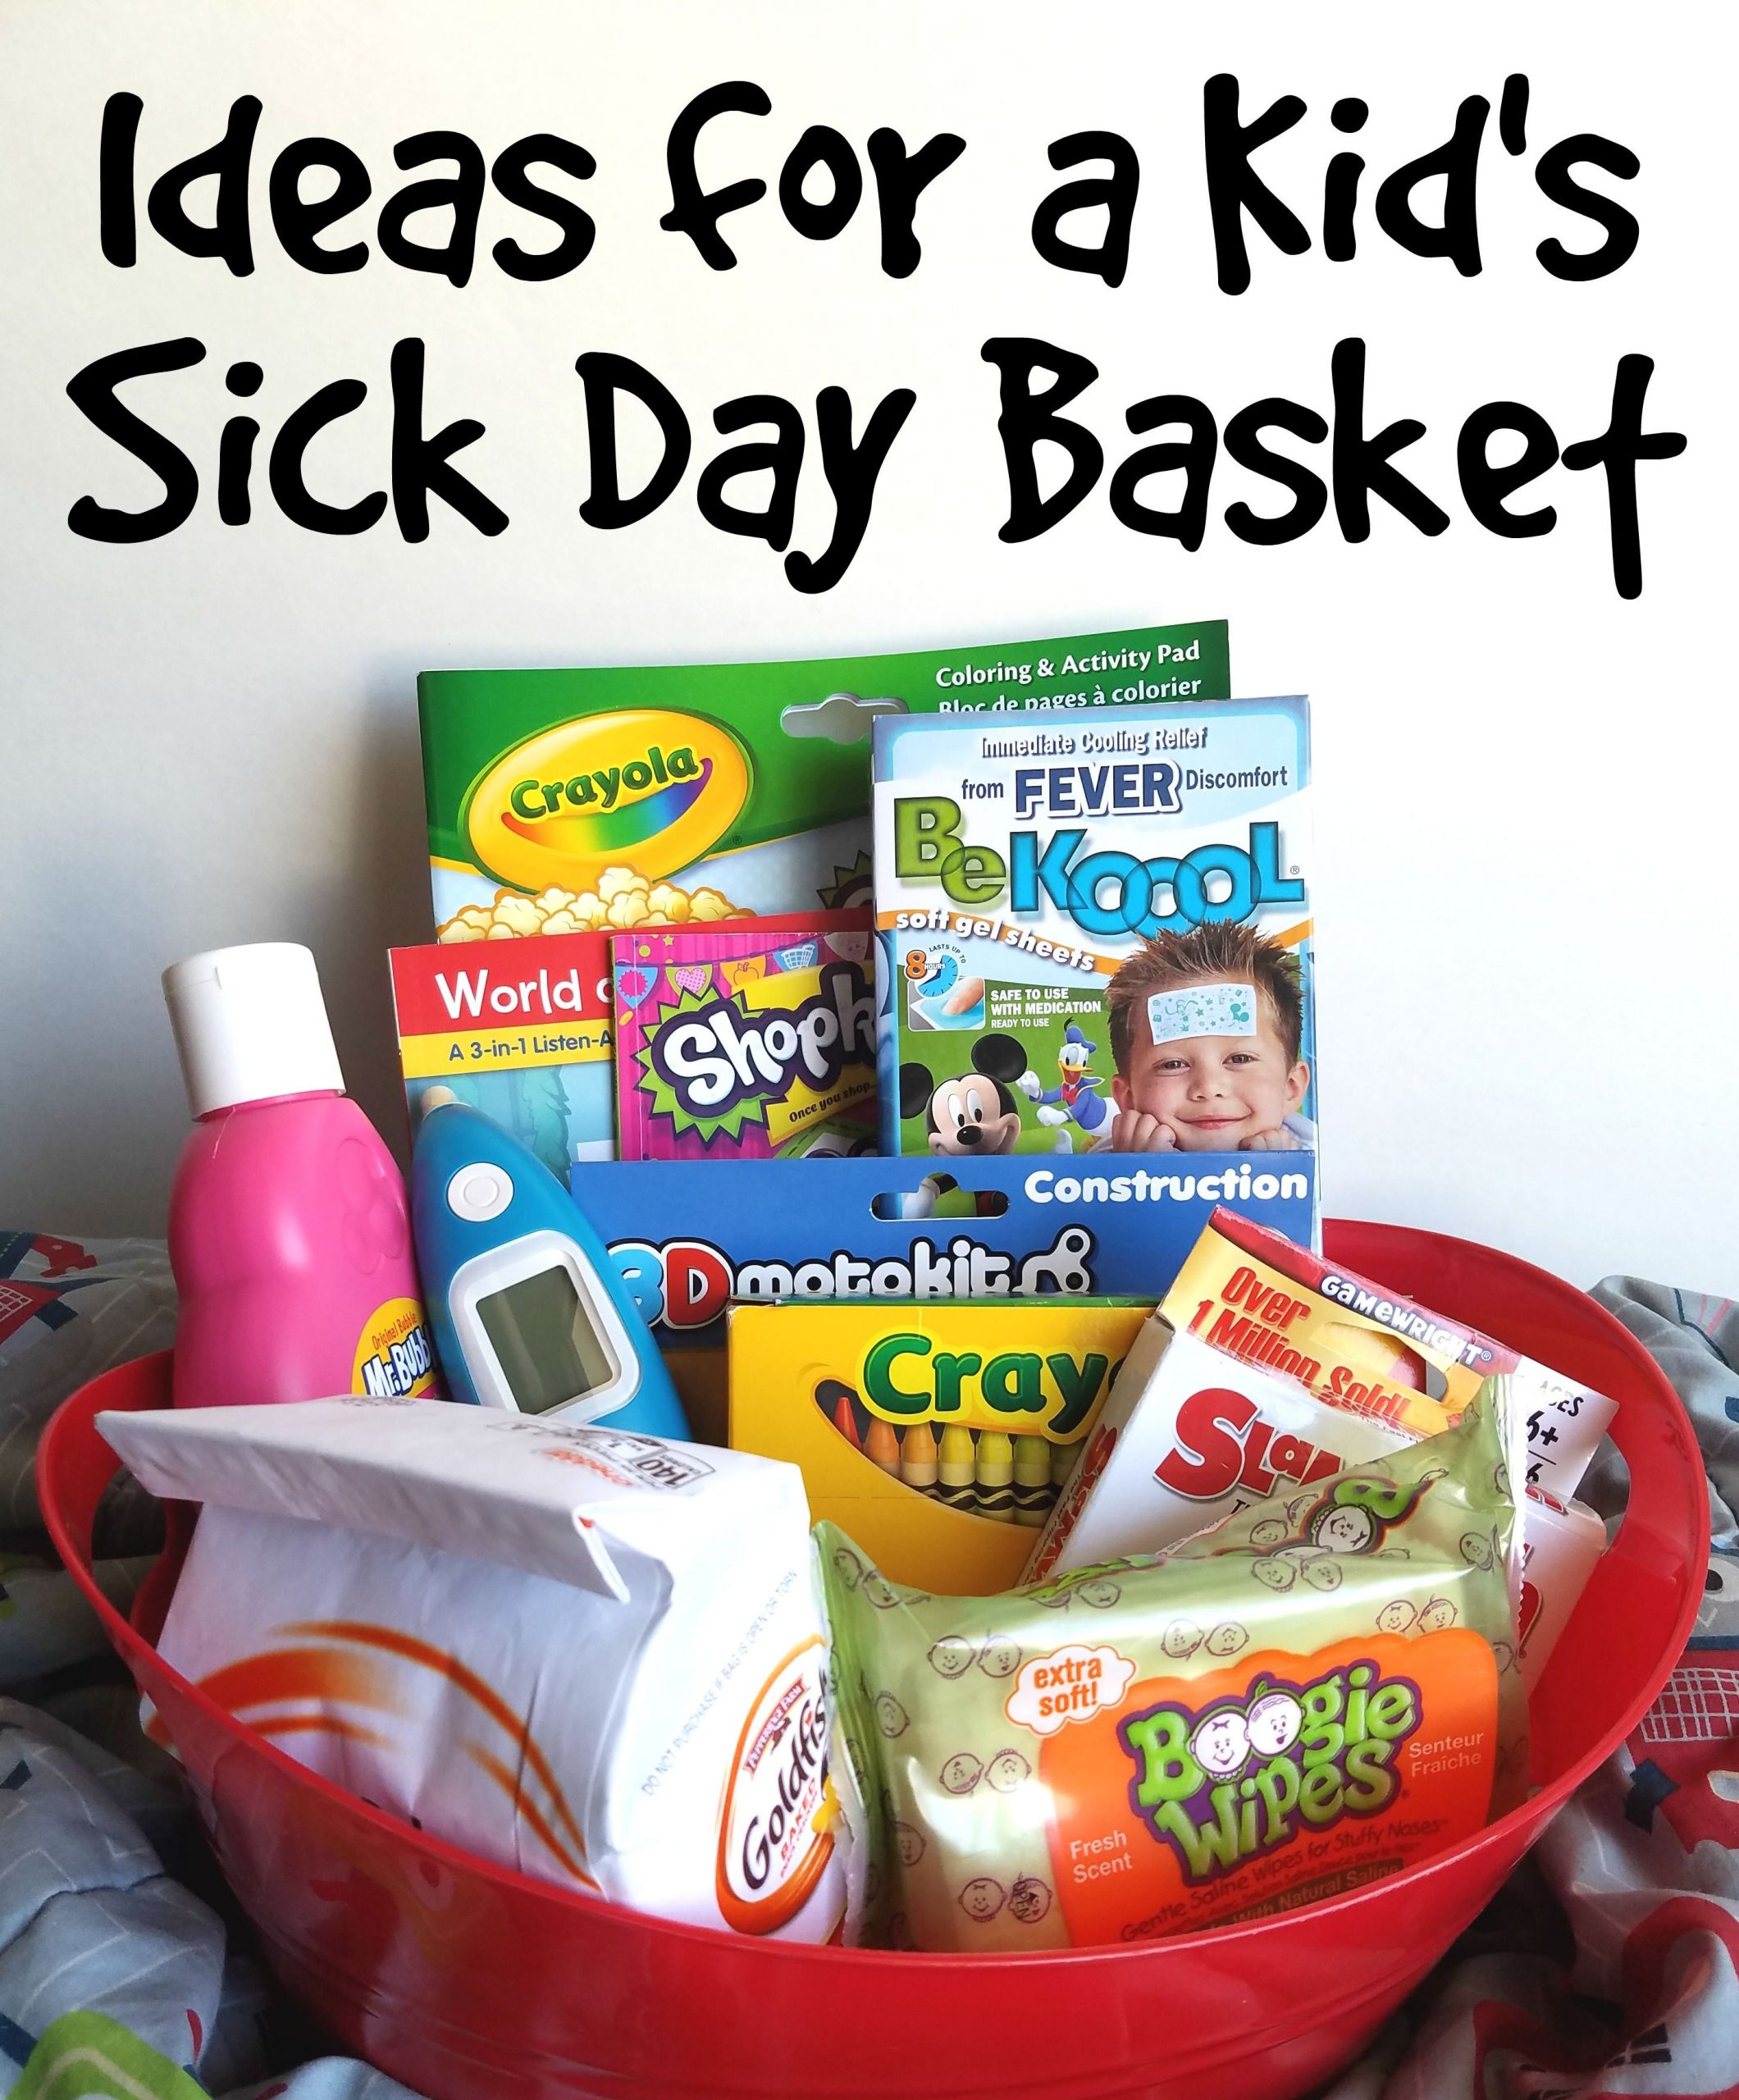 Get Well Soon Gifts For Kids
 Sick Day Basket For Kids